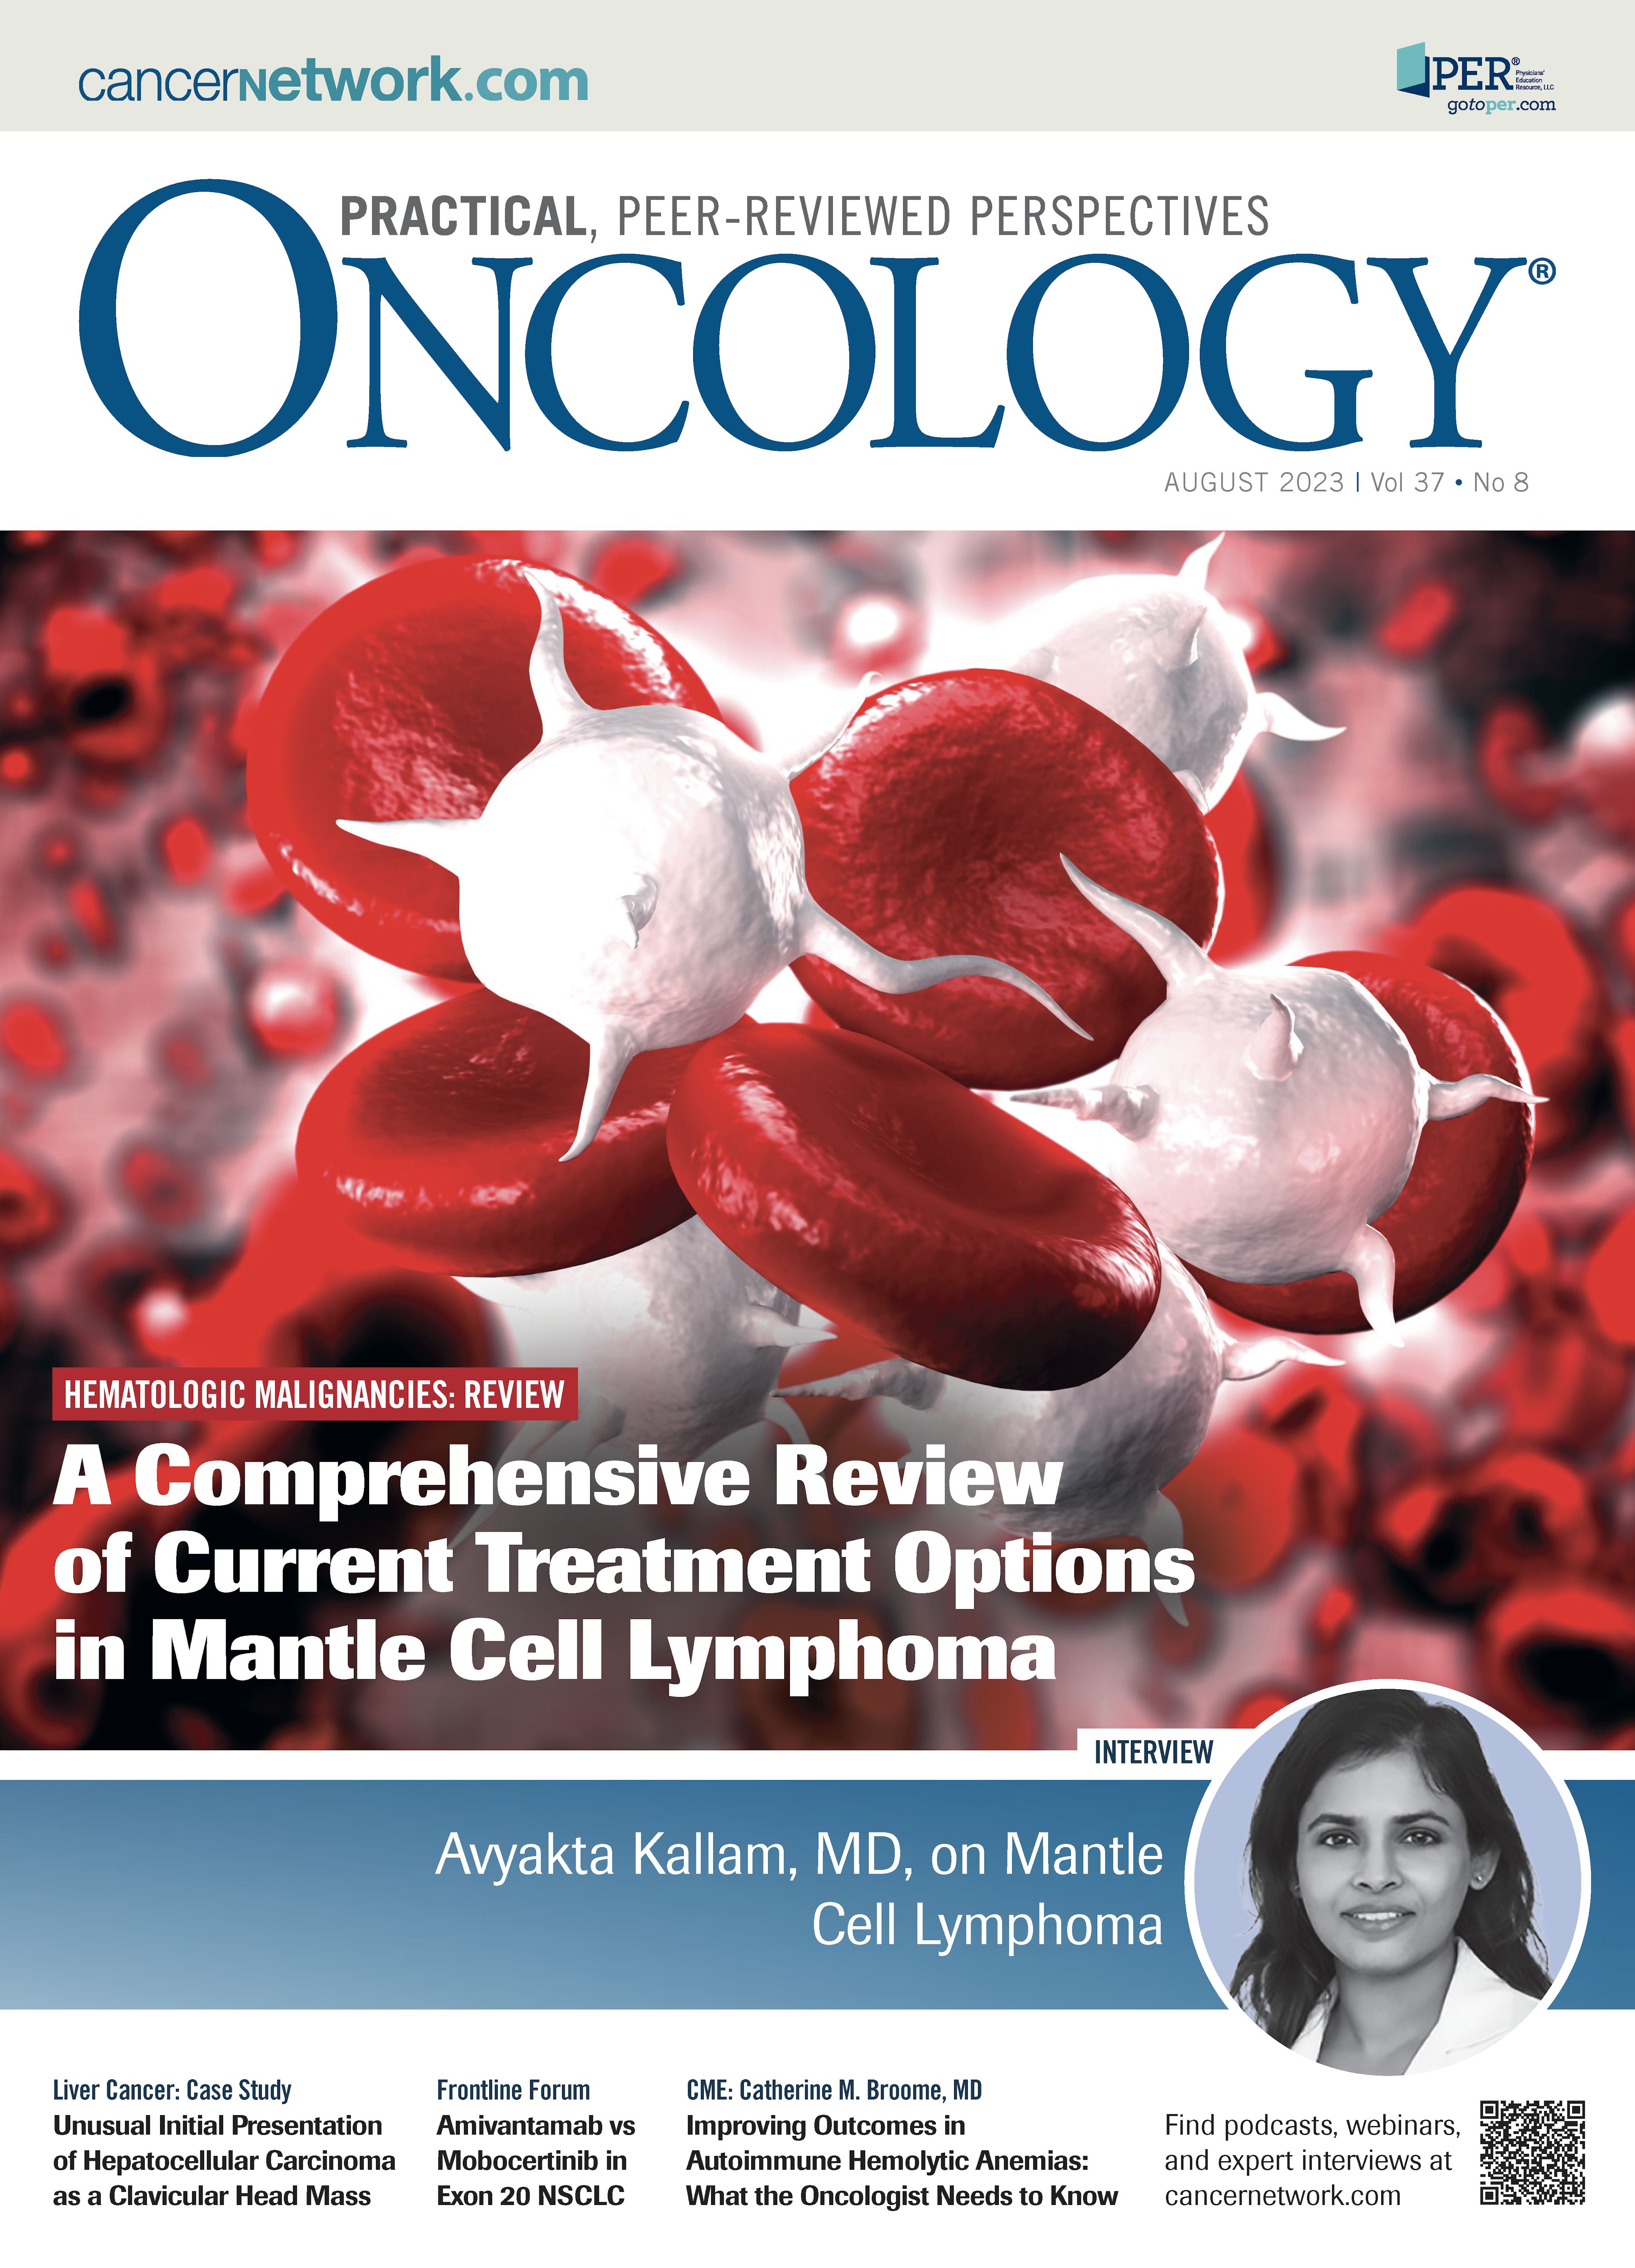 ONCOLOGY Vol 37, Issue 8